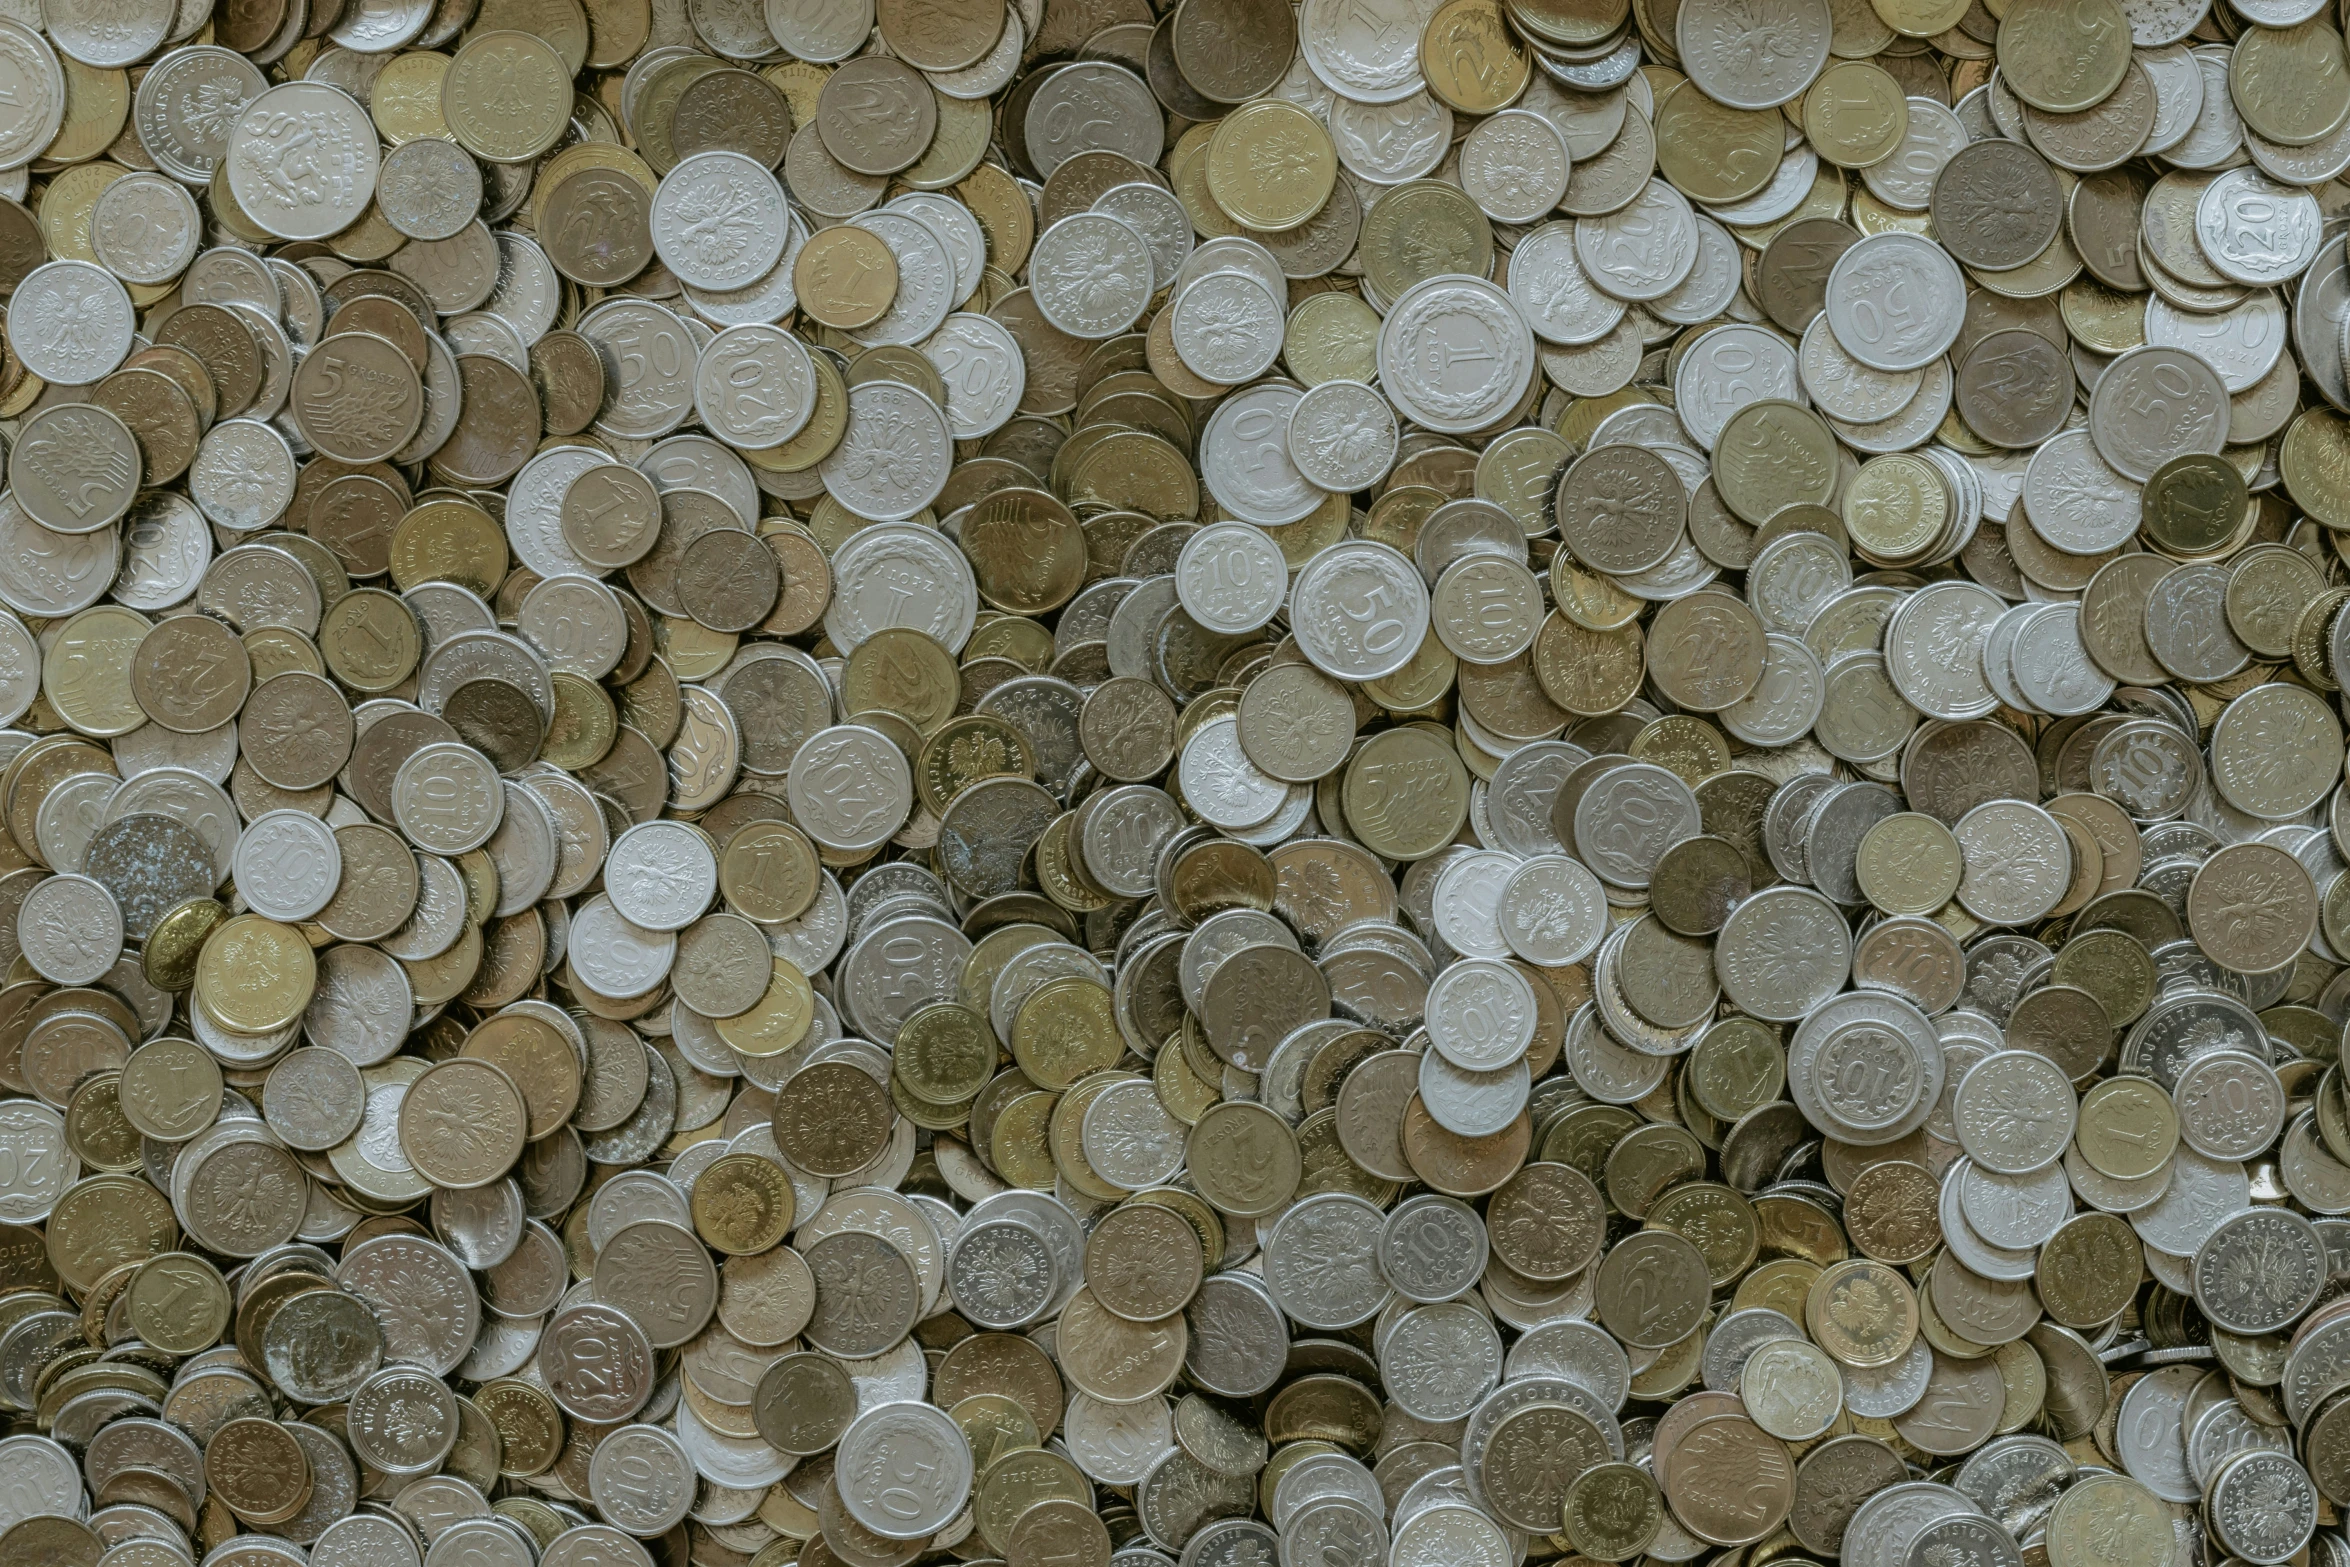 many small penny coins are scattered around the camera